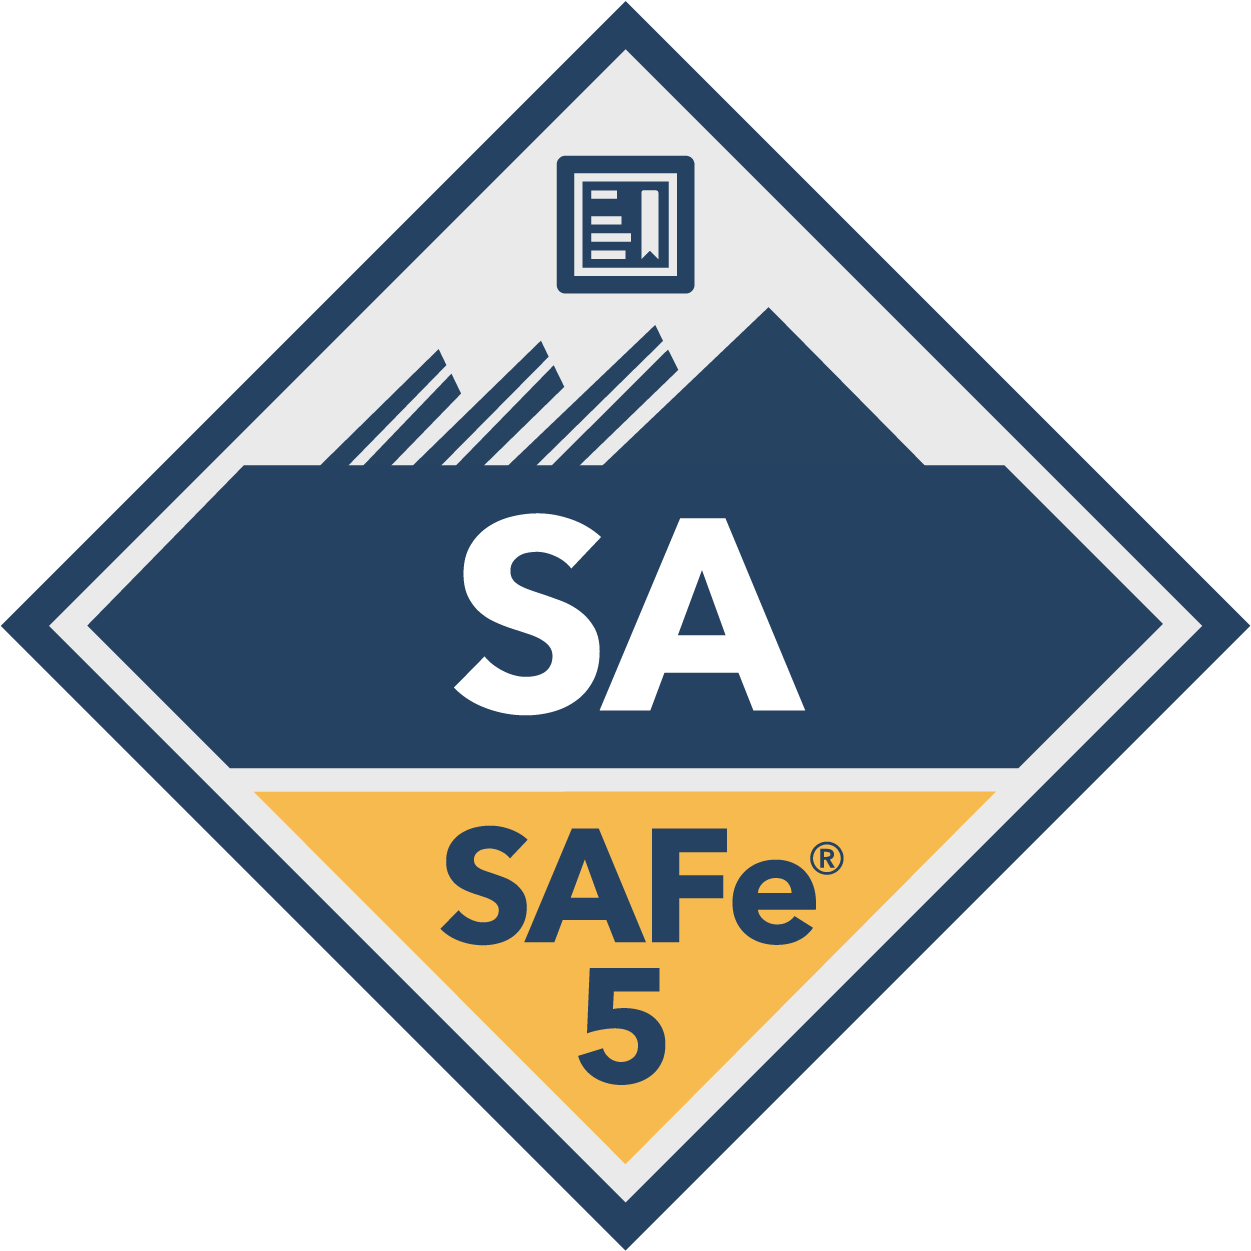 Online Scaled Agile : Leading SAFe 5.0 with SA Certification Detroit Online